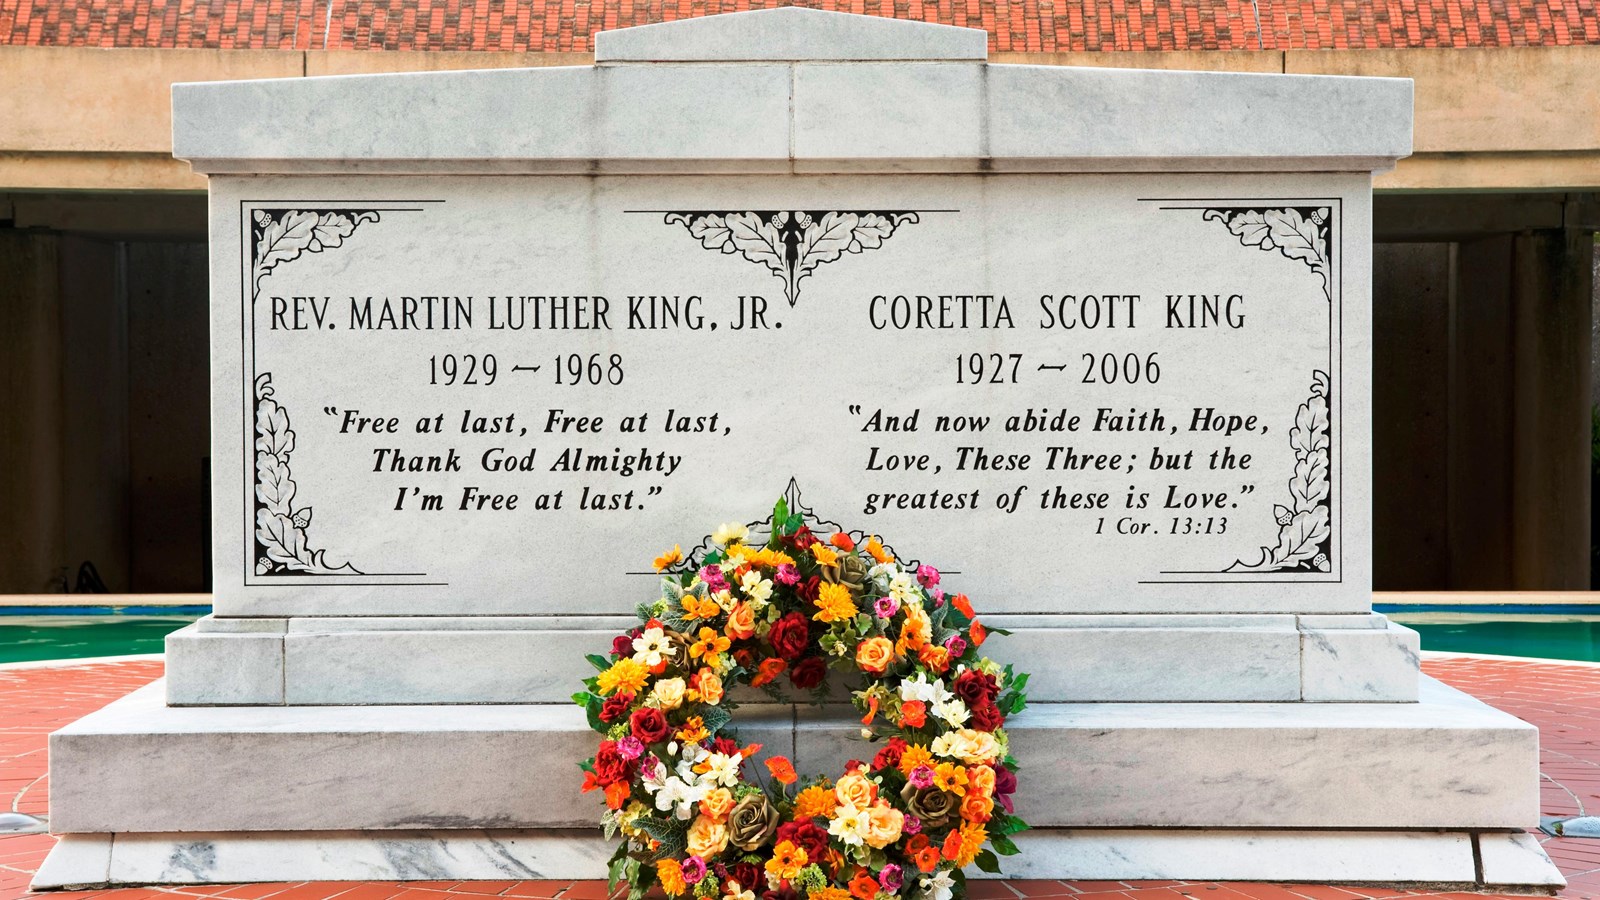 marble tomb containing Dr. and Mrs. King with a floral wreath